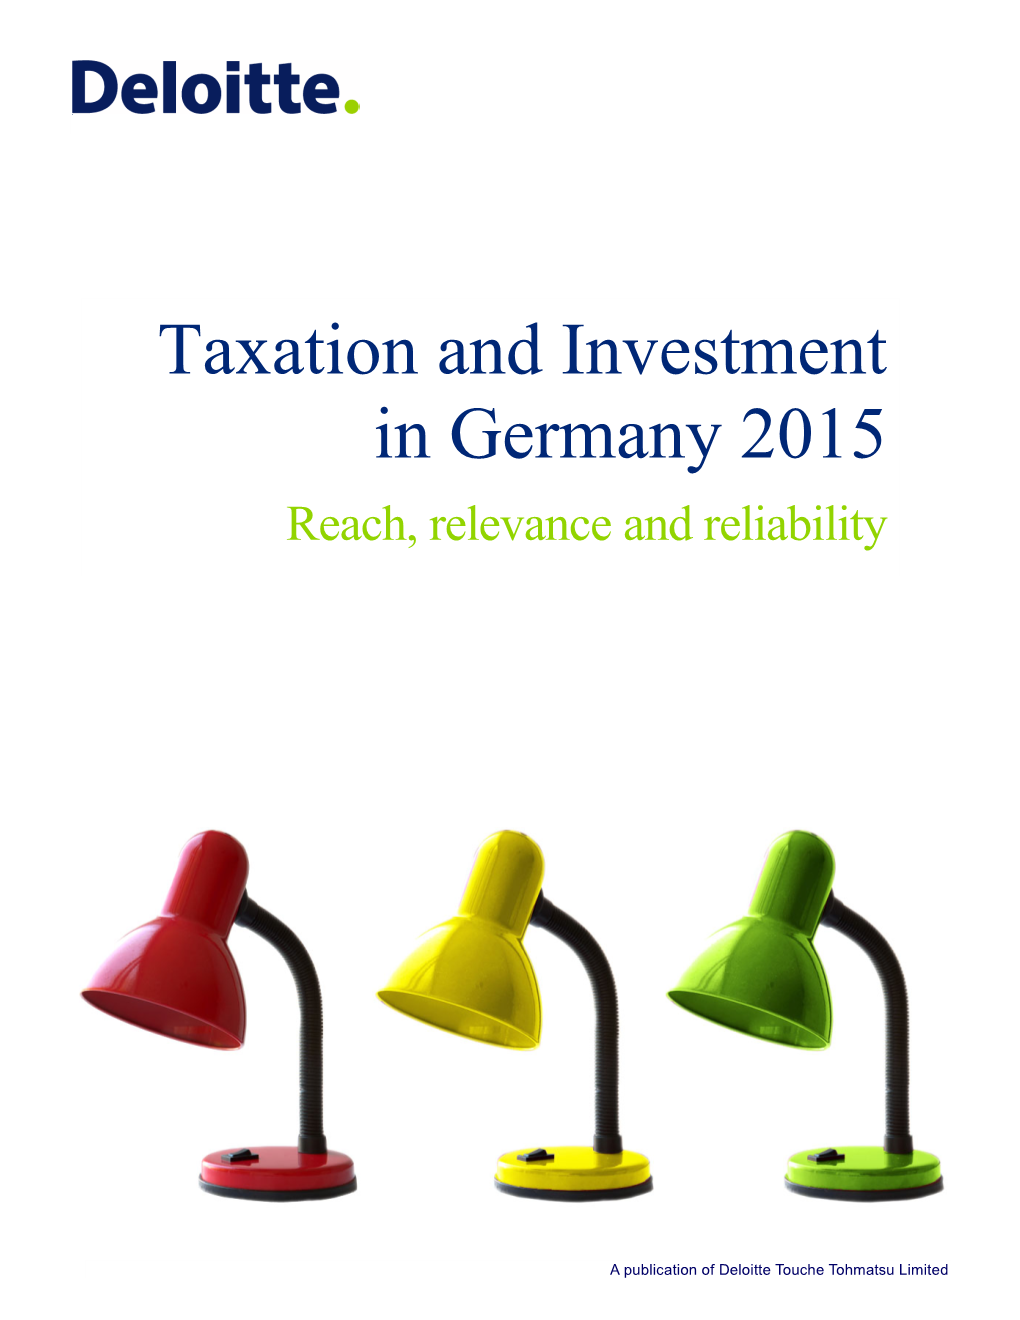 Taxation and Investment in Germany 2015 Reach, Relevance and Reliability